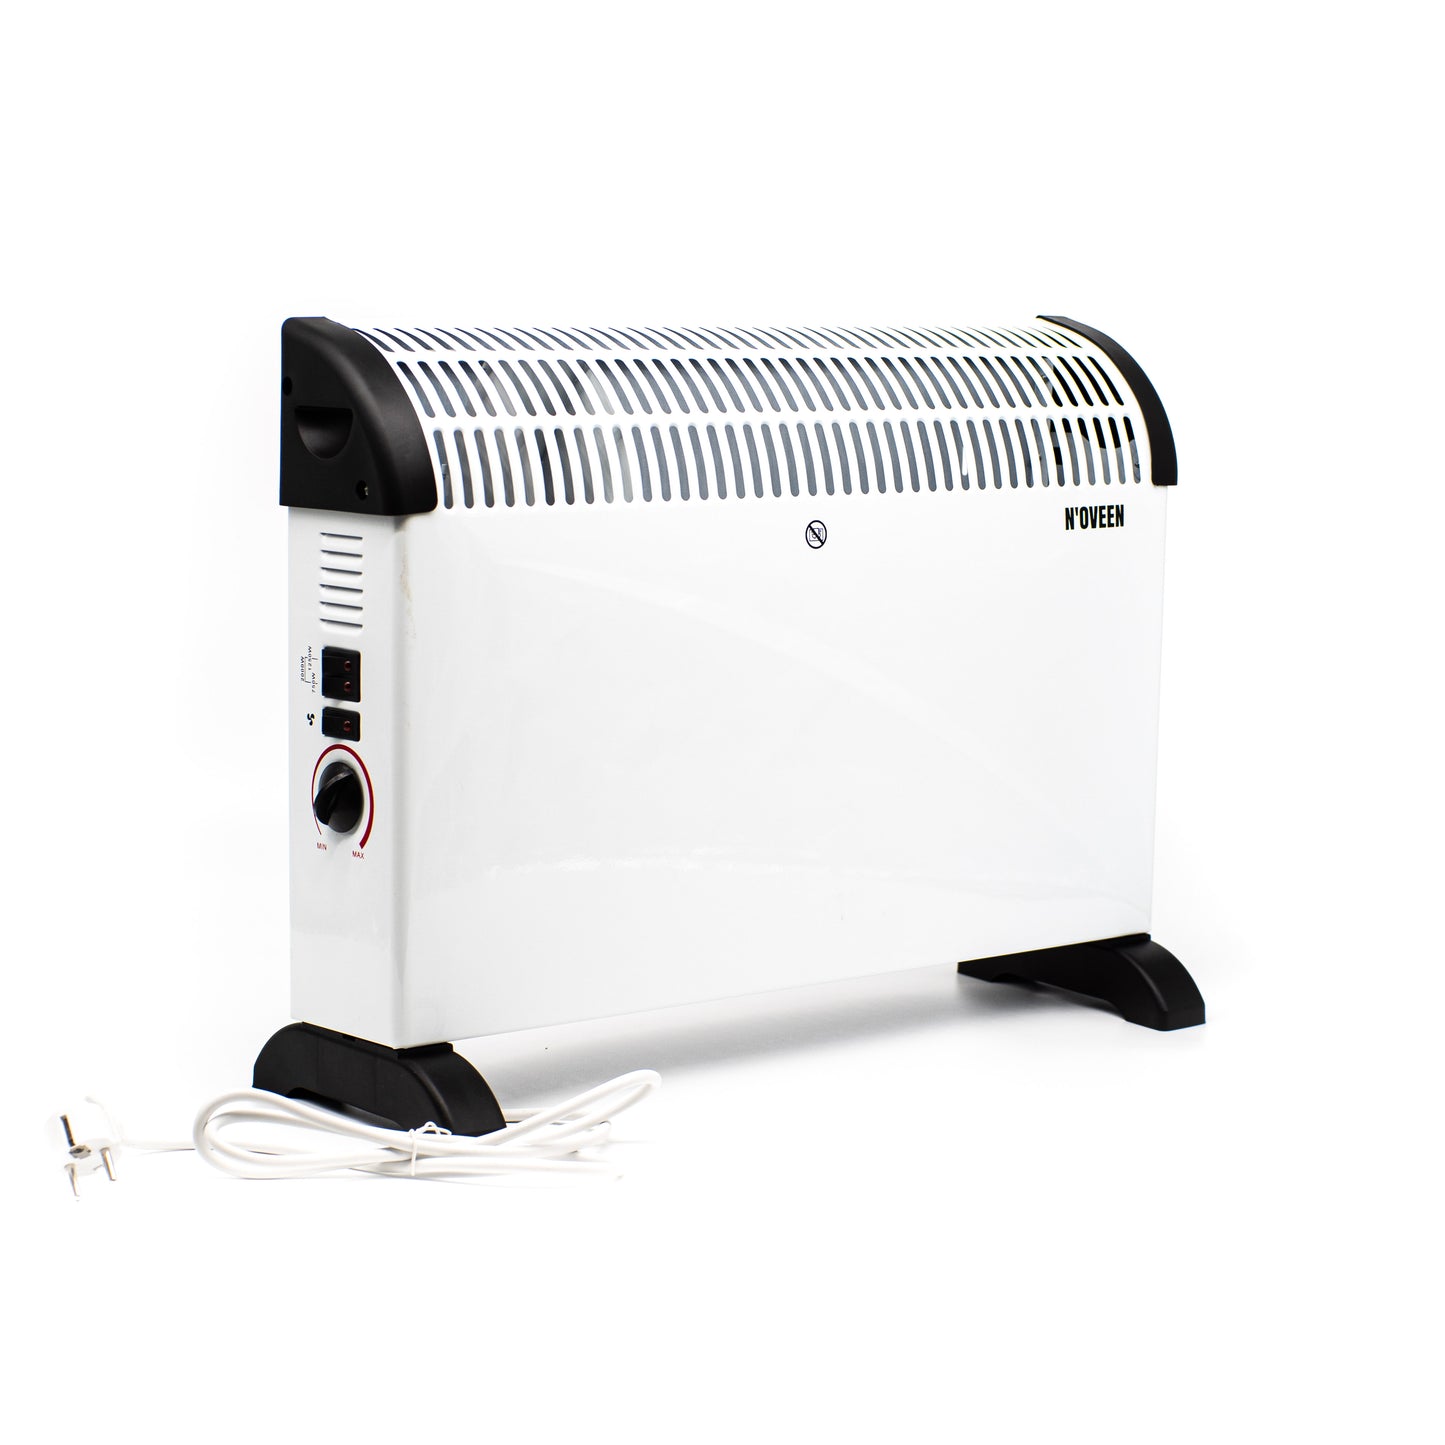 2000W premium convector - electric heating Electric convector with 2000 watt rotary control